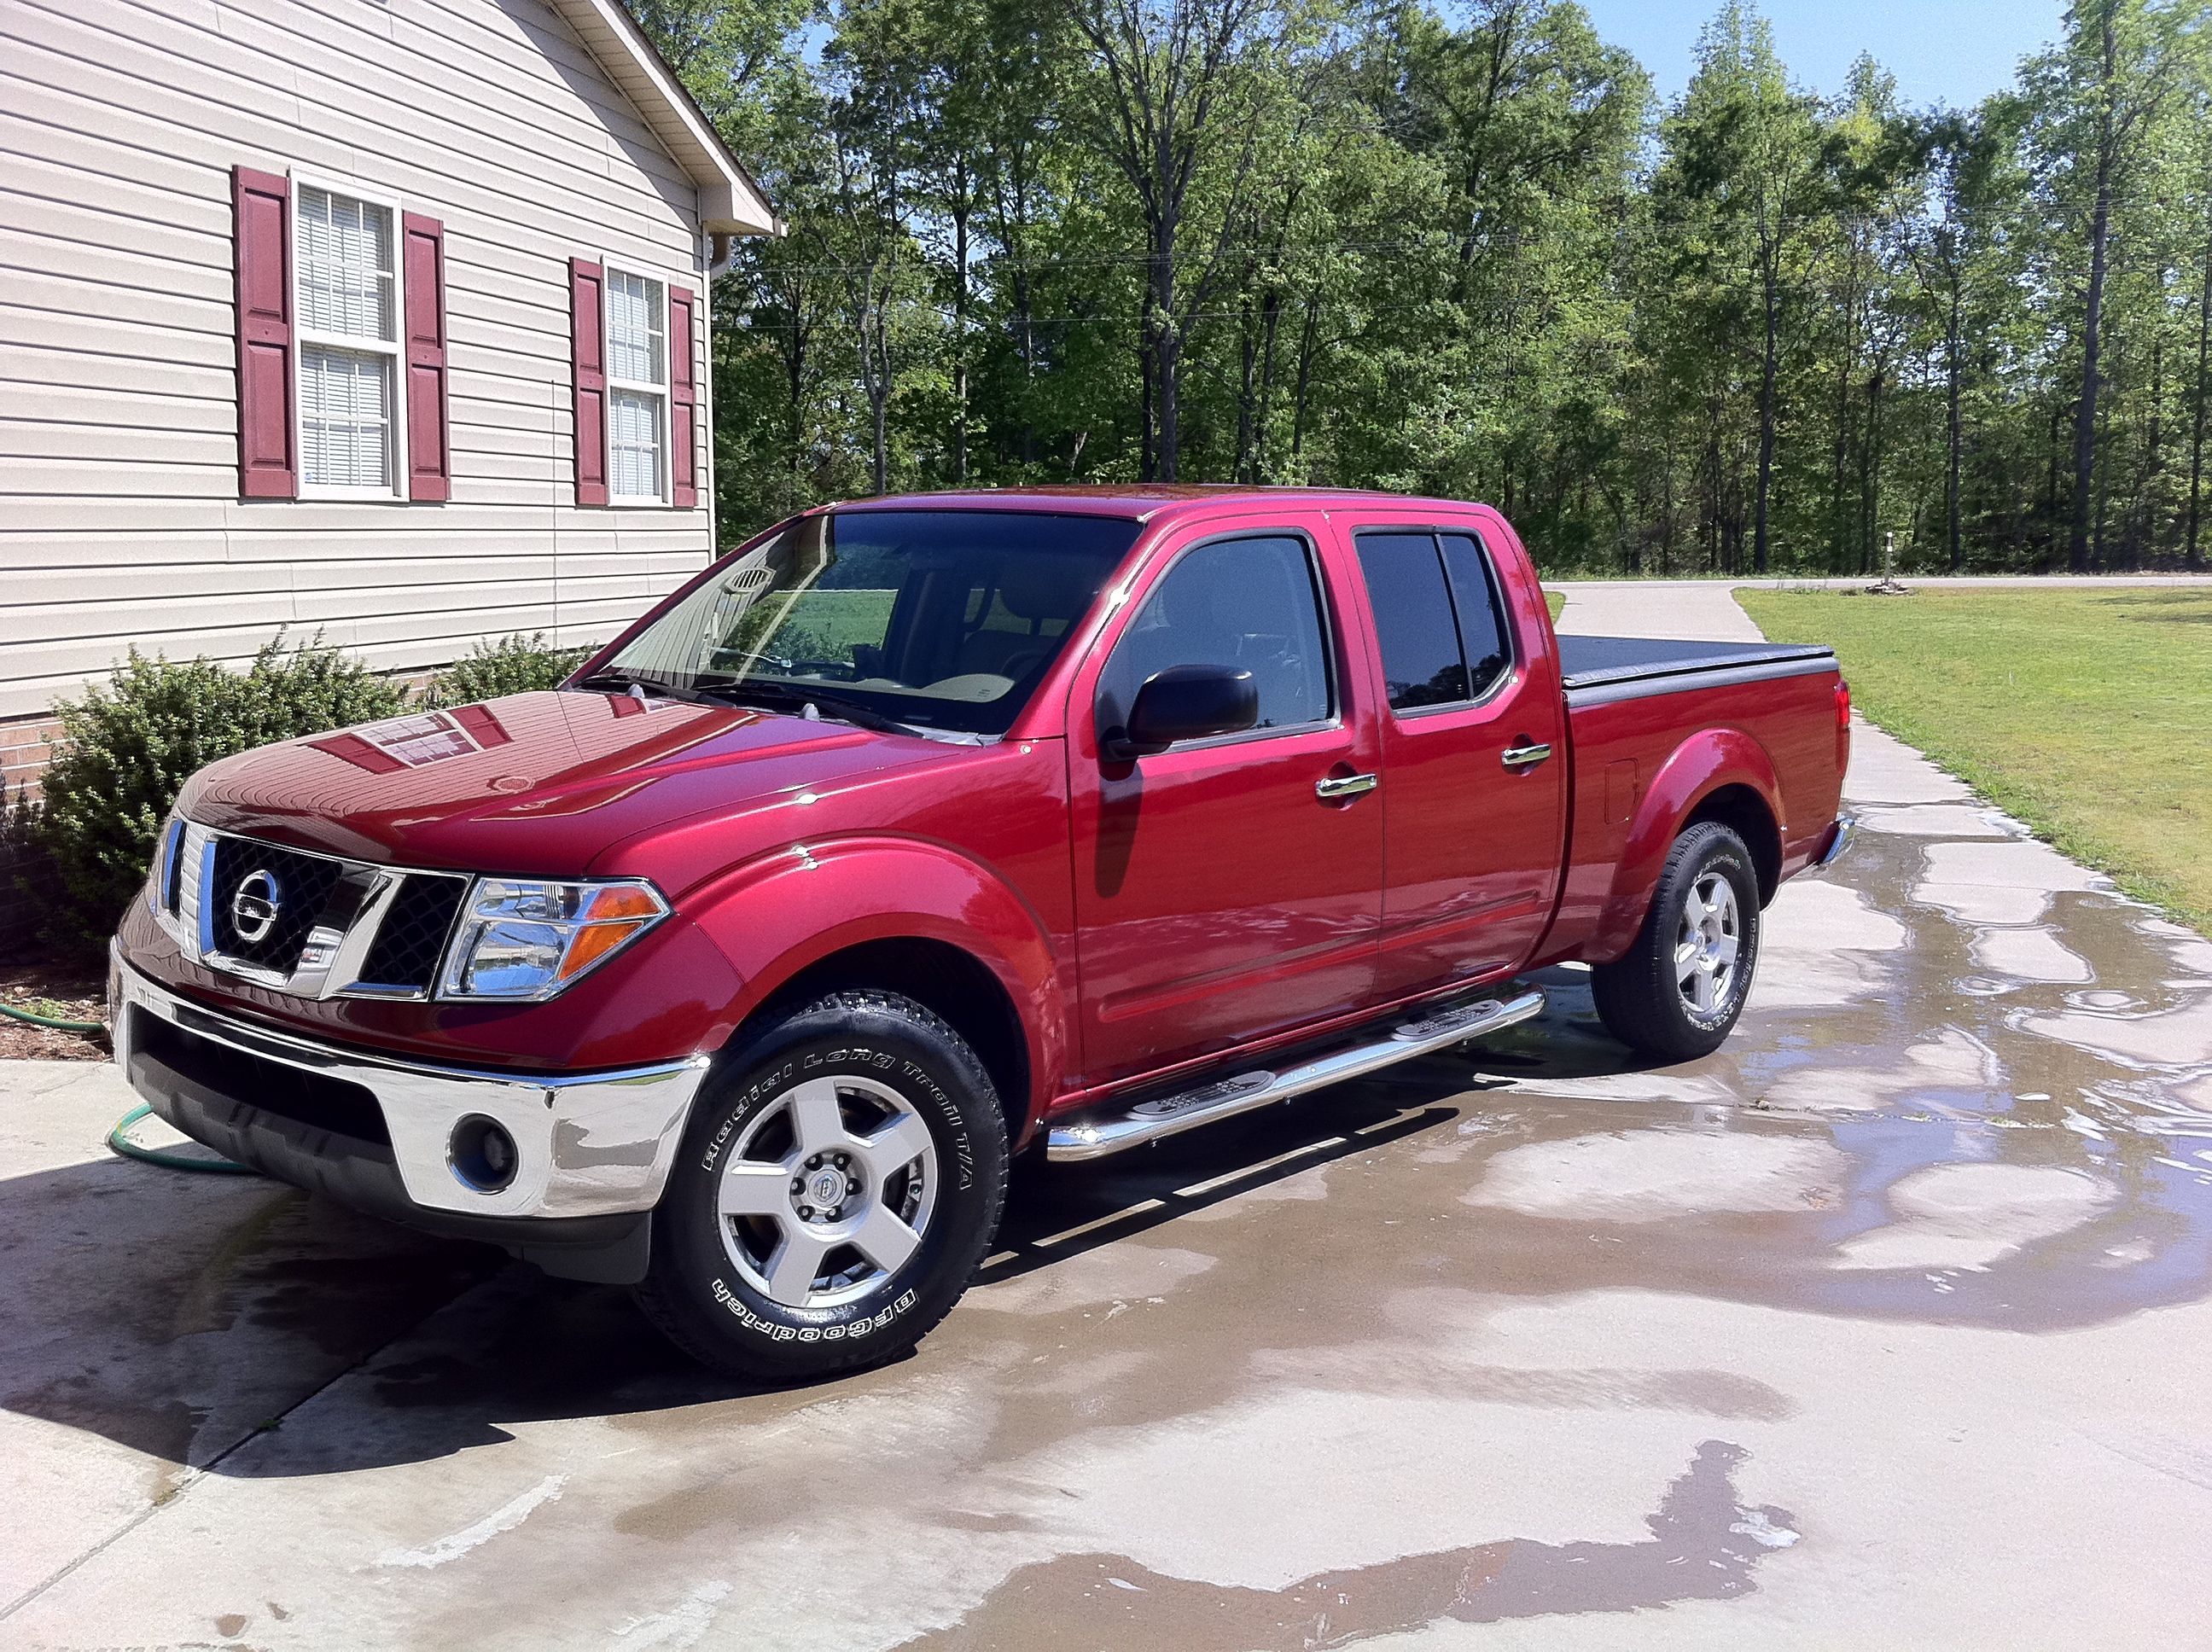 2007 Nissan Frontier Crew Cab Extended Bed | Flickr - Photo Sharing!